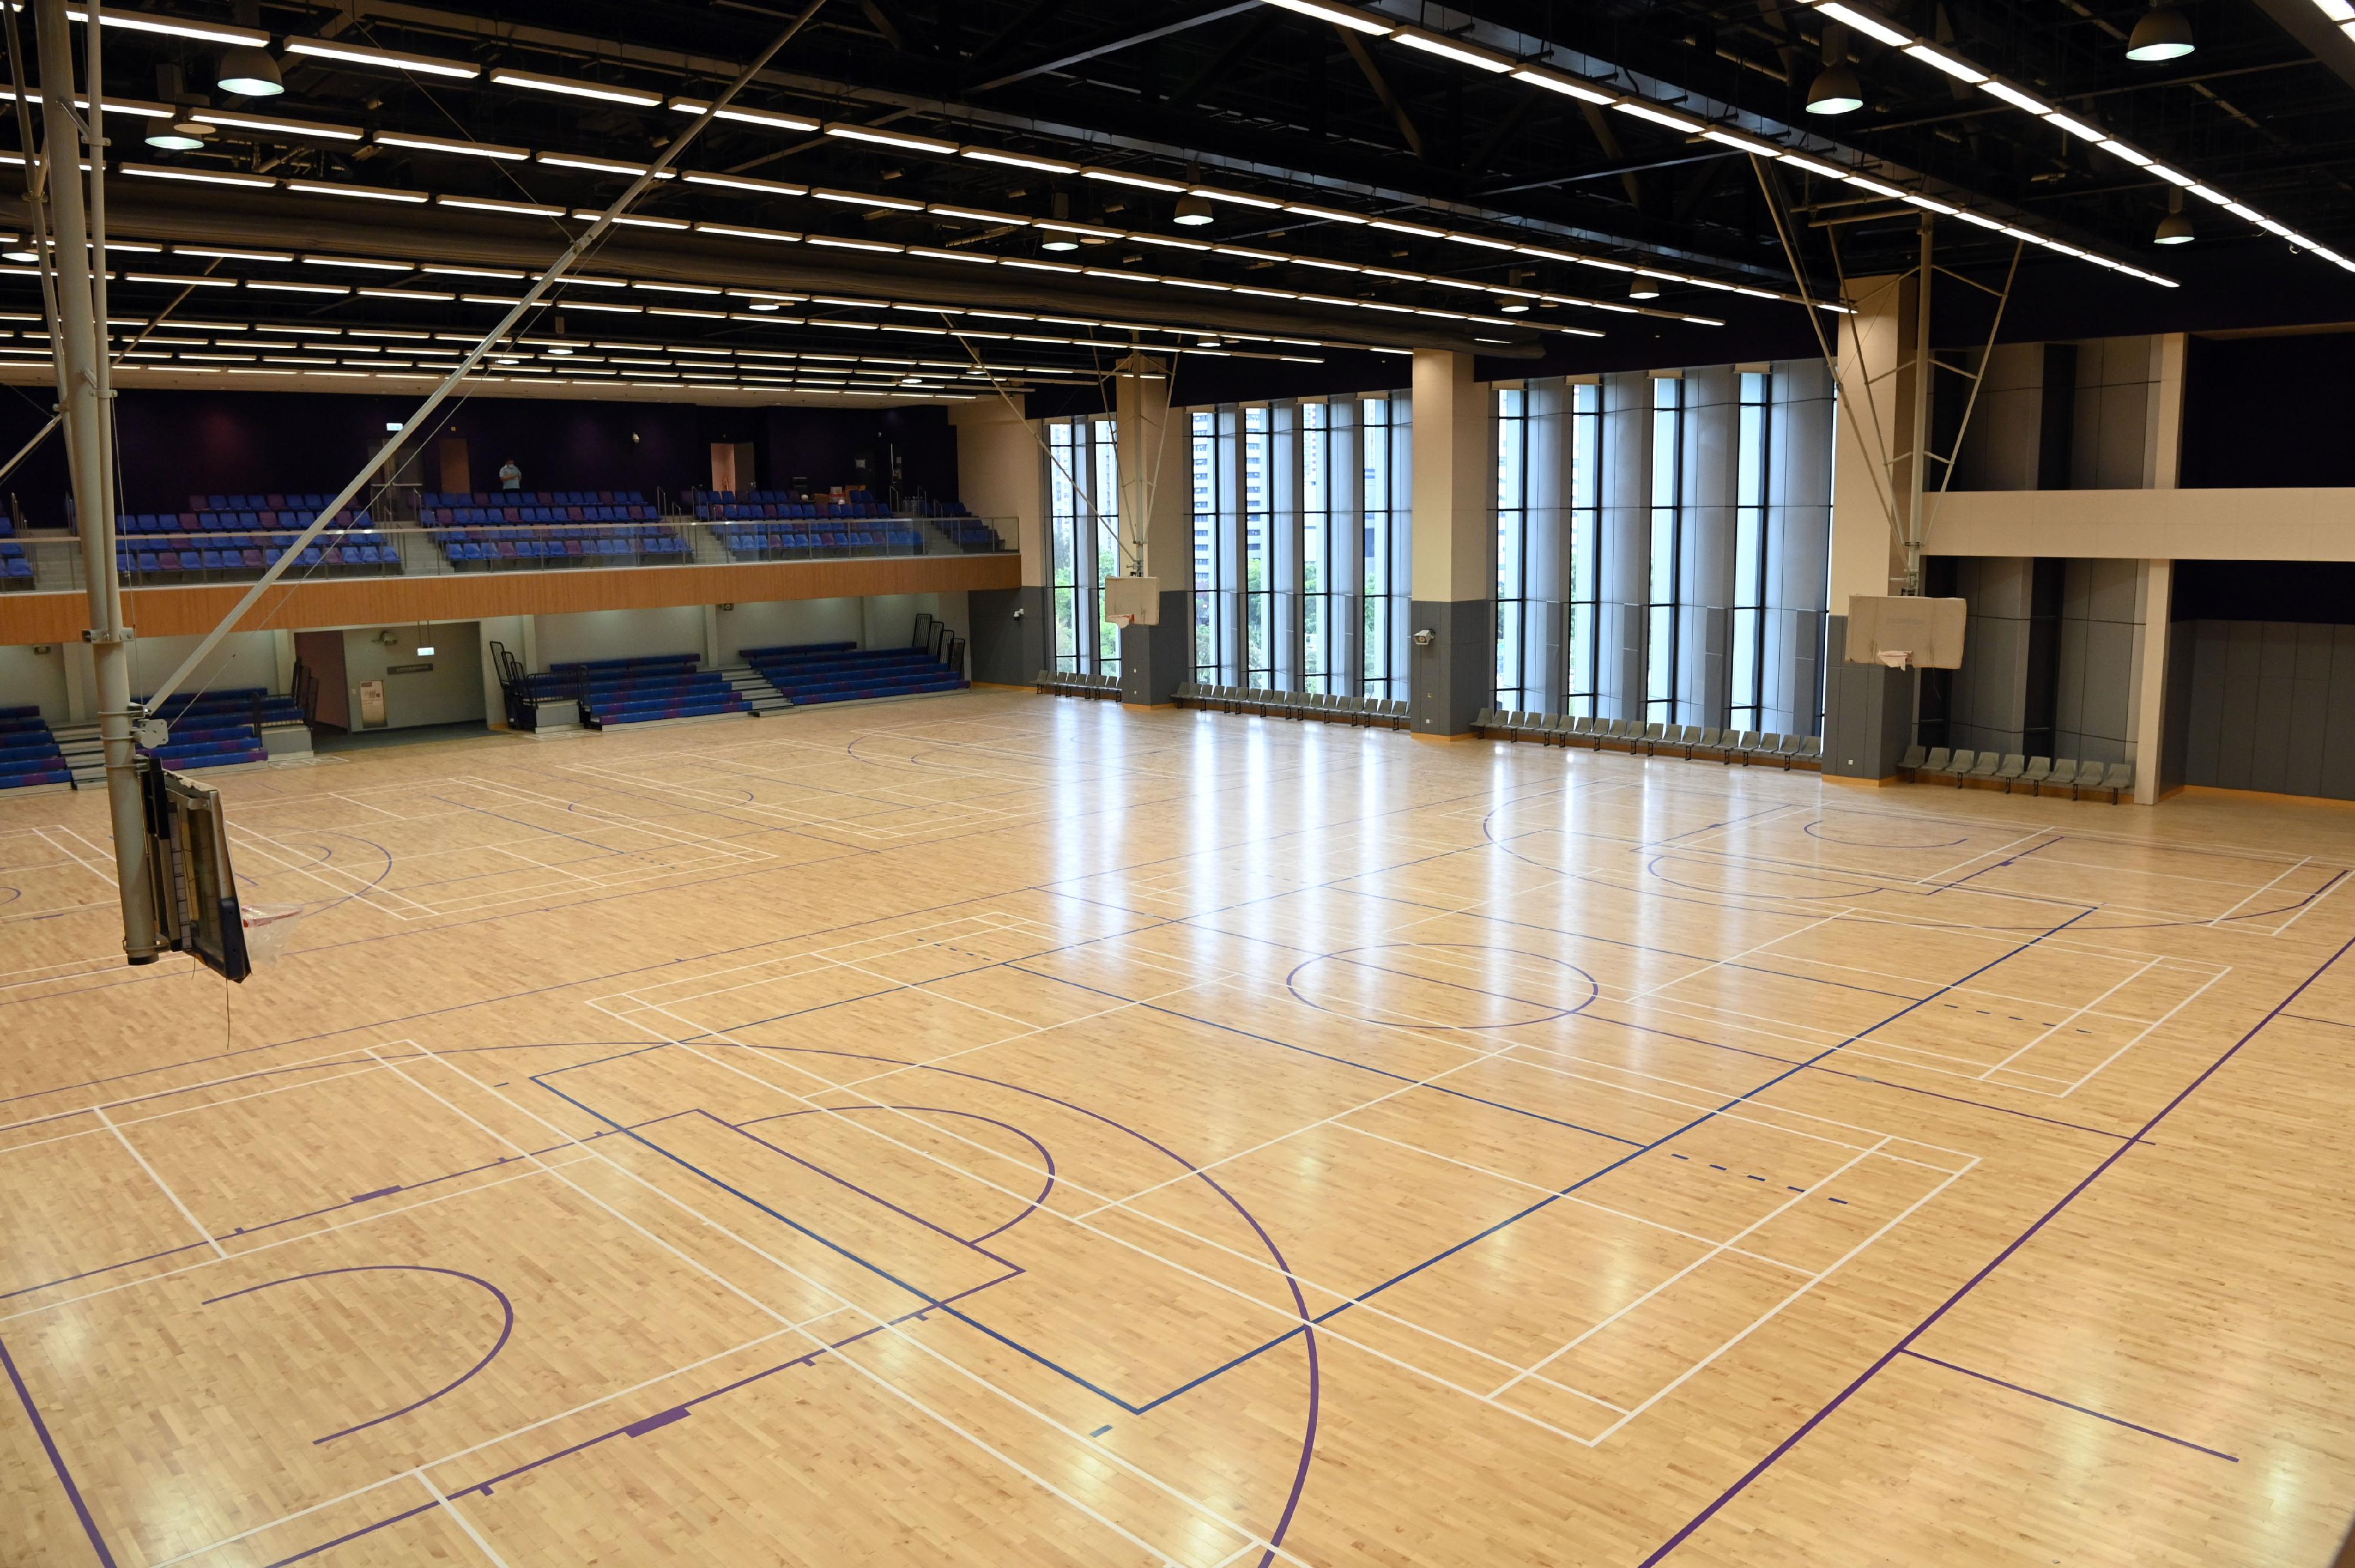 Tung Cheong Street Sports Centre, managed by the Leisure and Cultural Services Department, will open for public use on August 15 (Monday). The new Tung Cheong Street Sports Centre has a total area of about 9 400 square metres, providing a wide range of leisure and sports facilities. Photo shows the multi-purpose arena, which can serve as two basketball courts or two volleyball courts or eight badminton courts.